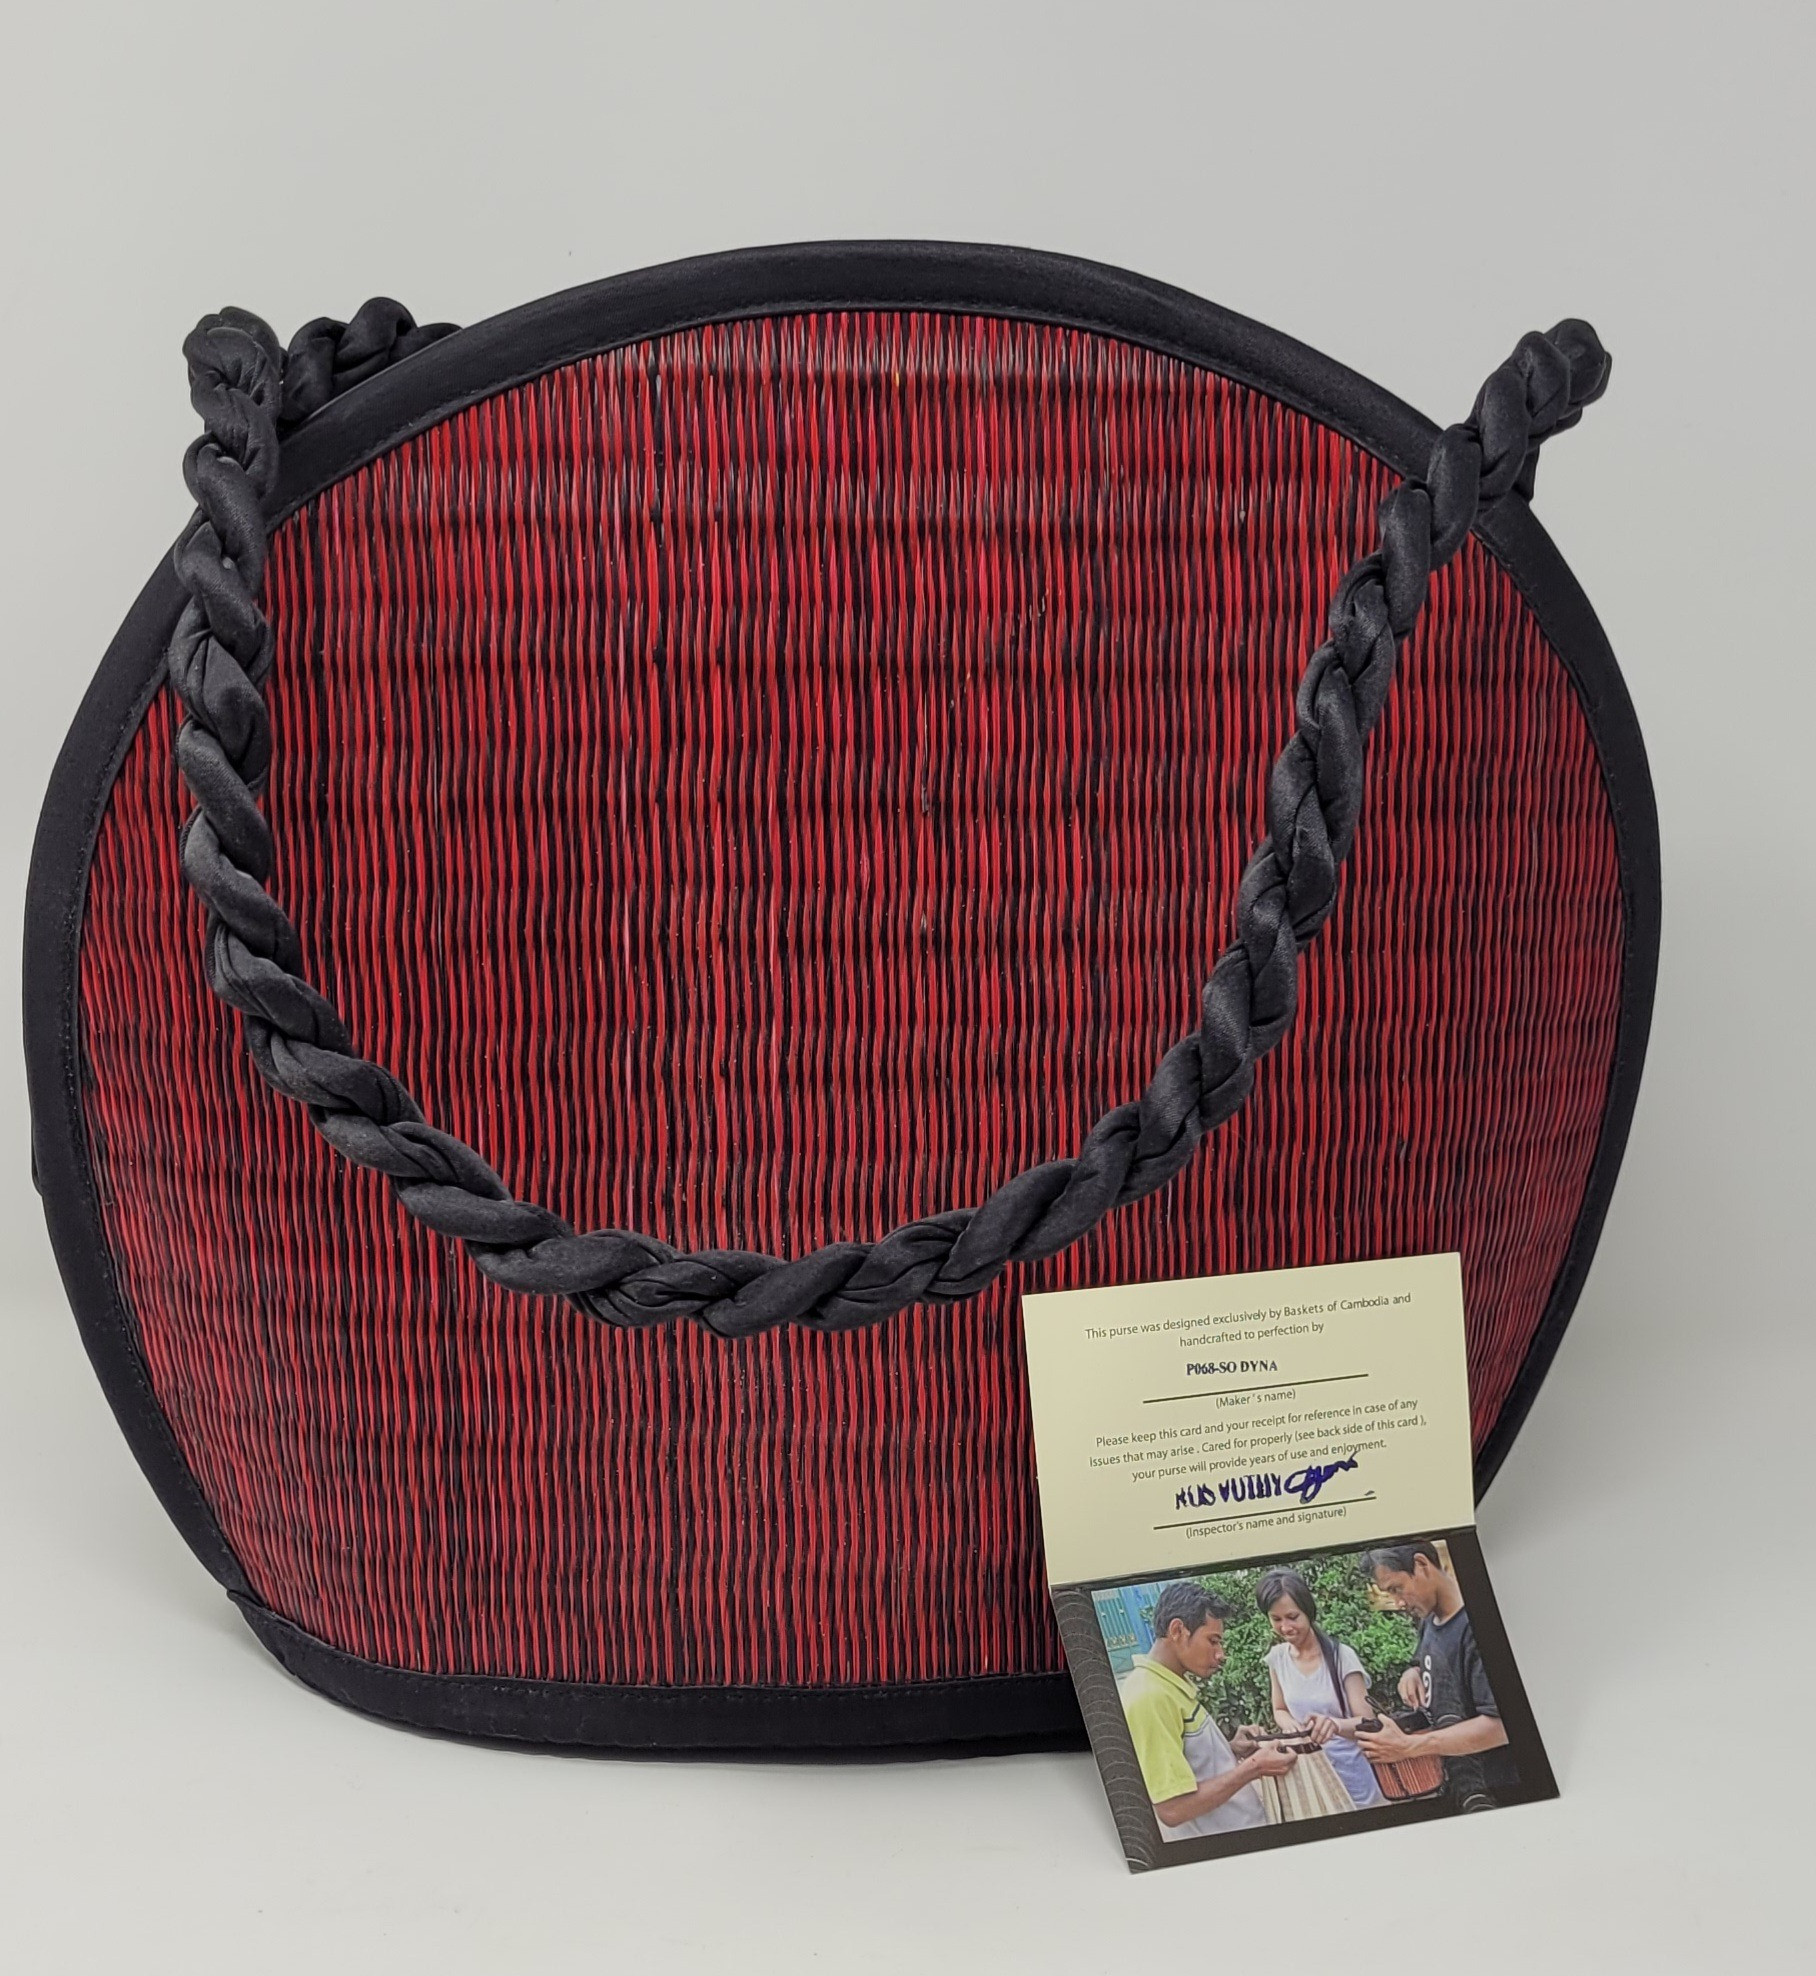 Handcrafted Baskets of Cambodia Purse